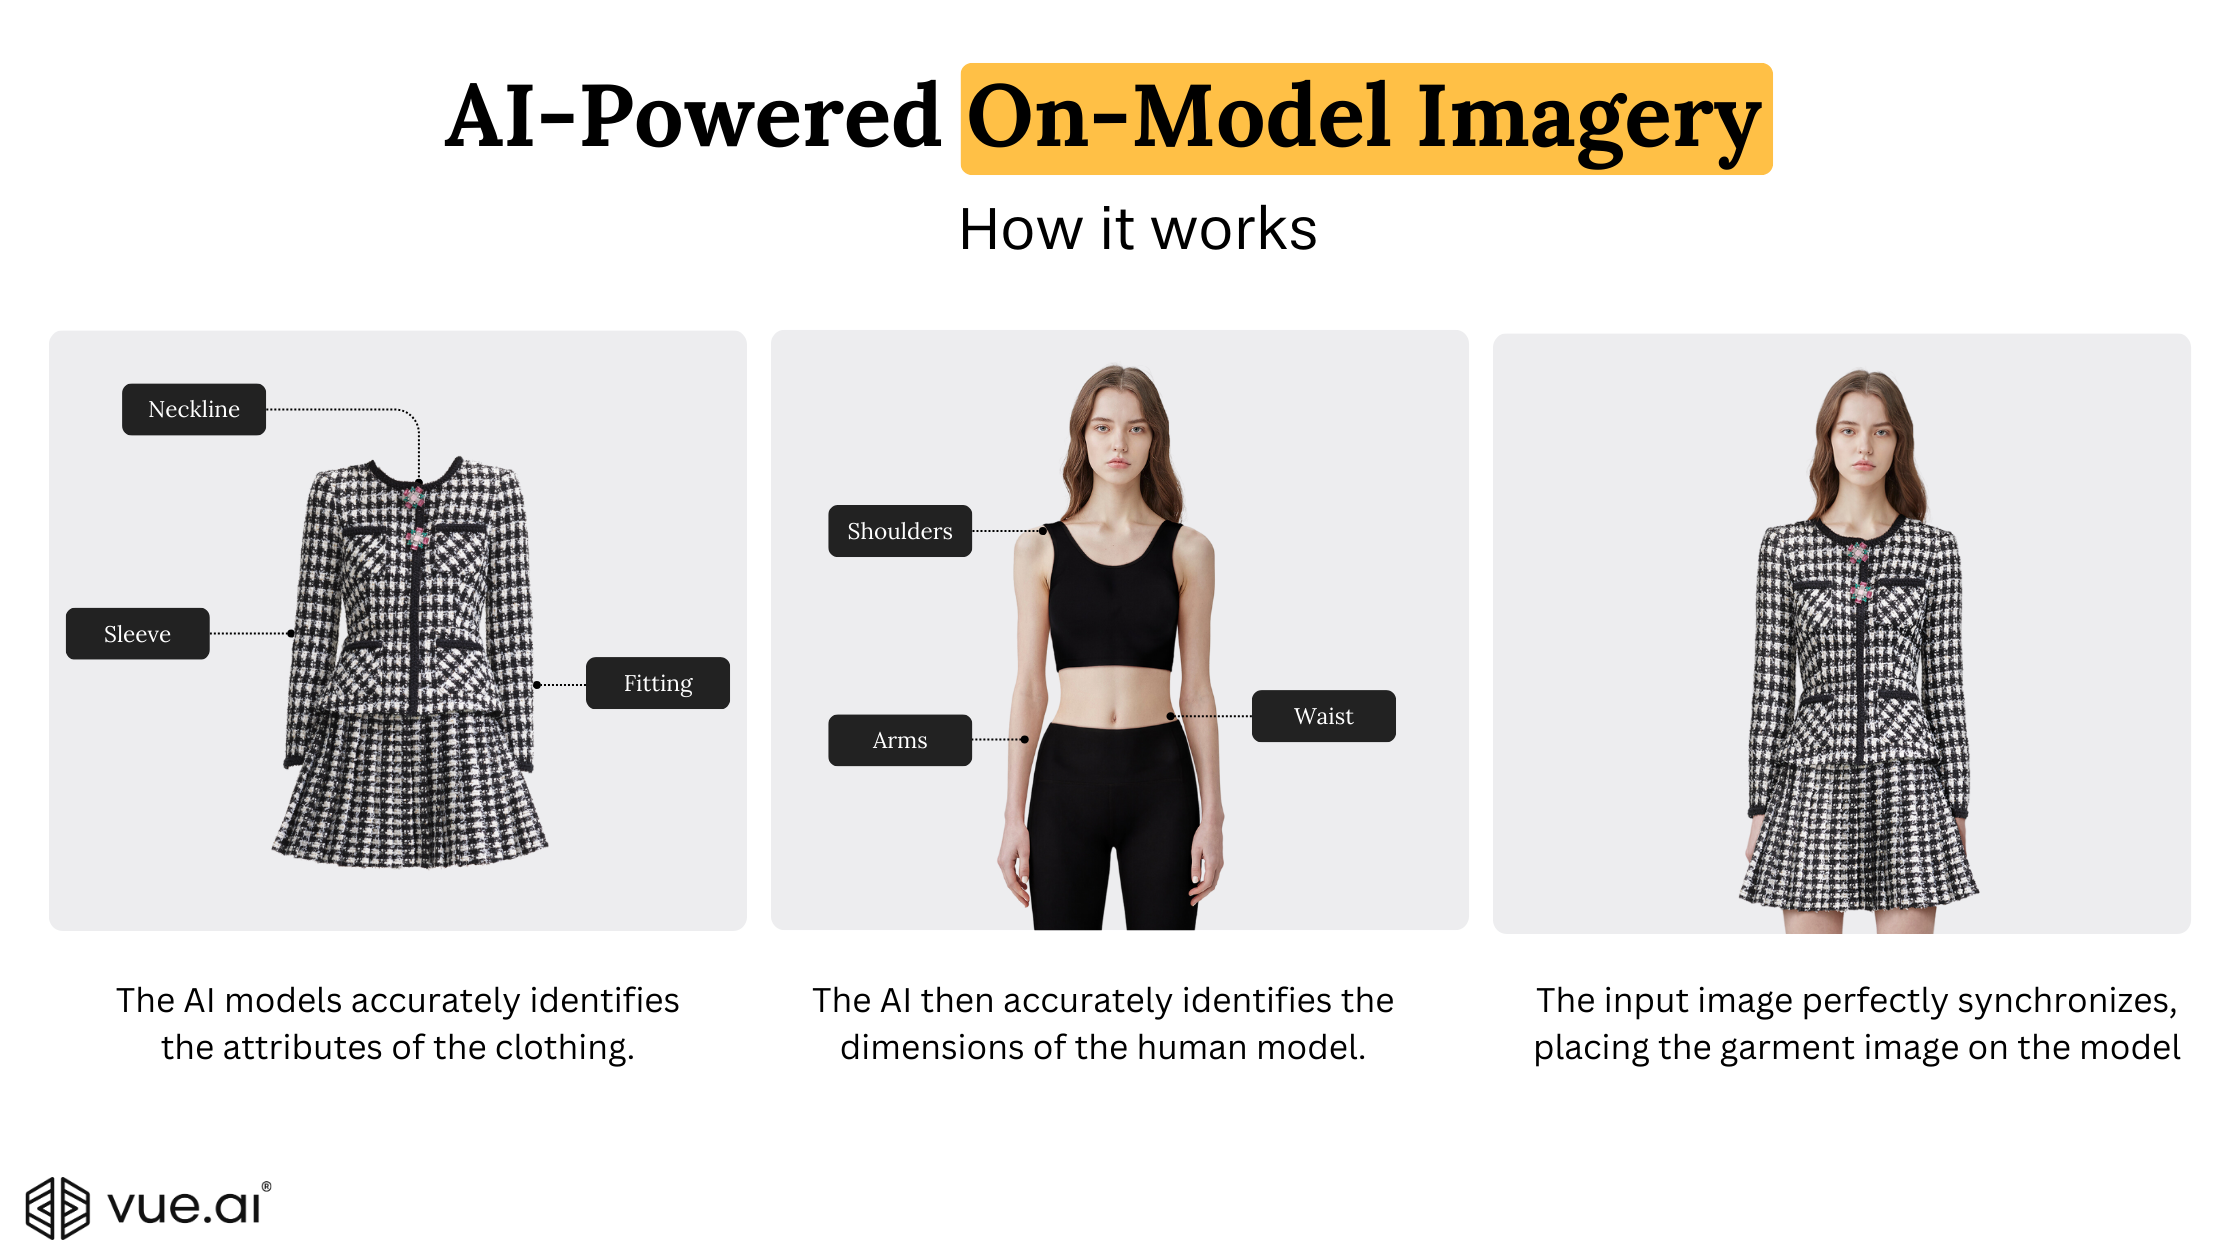 Vue.ai's on-model imagery solution - how it works